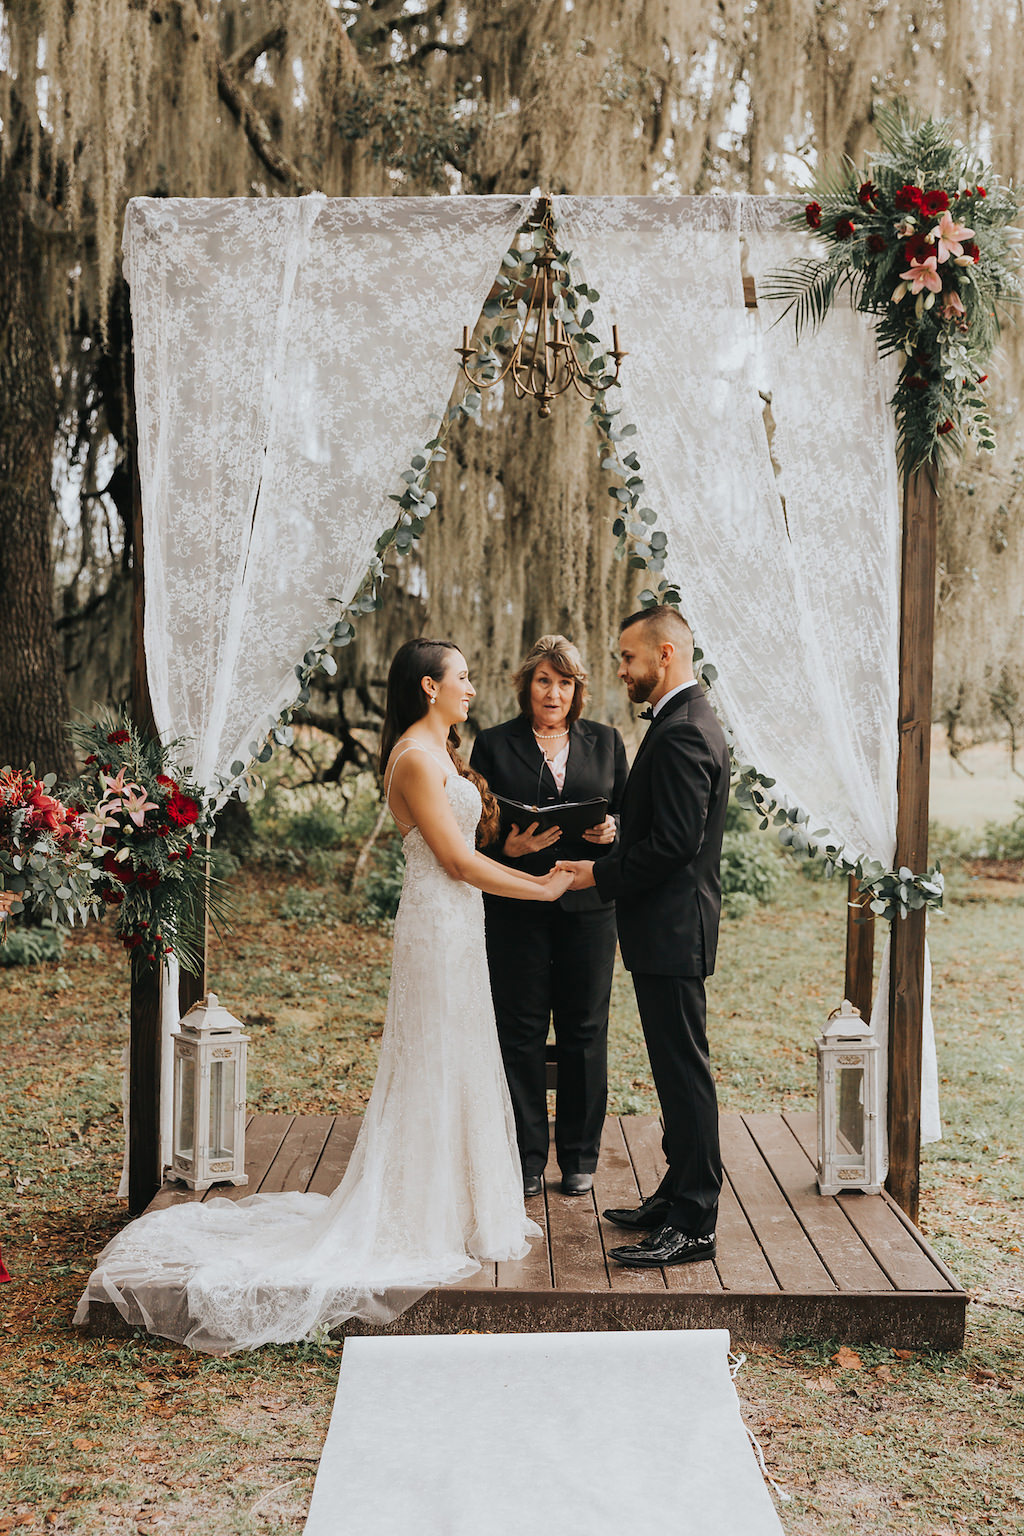 Bride and Groom Wedding Ceremony Under Romantic Wooden Wedding Ceremony Arch on Platform with Lace Drapes, Green Garland, Rich Red and Pink Floral Arrangements with Greenery, White Lanterns, on Rural Florida Farm Backdrop, Bride in Beaded White Spaghetti Strap Wedding Dress | Tampa Bay Wedding Dress Shop Truly Forever Bridal | Rustic Venue The Orange Blossom Barn